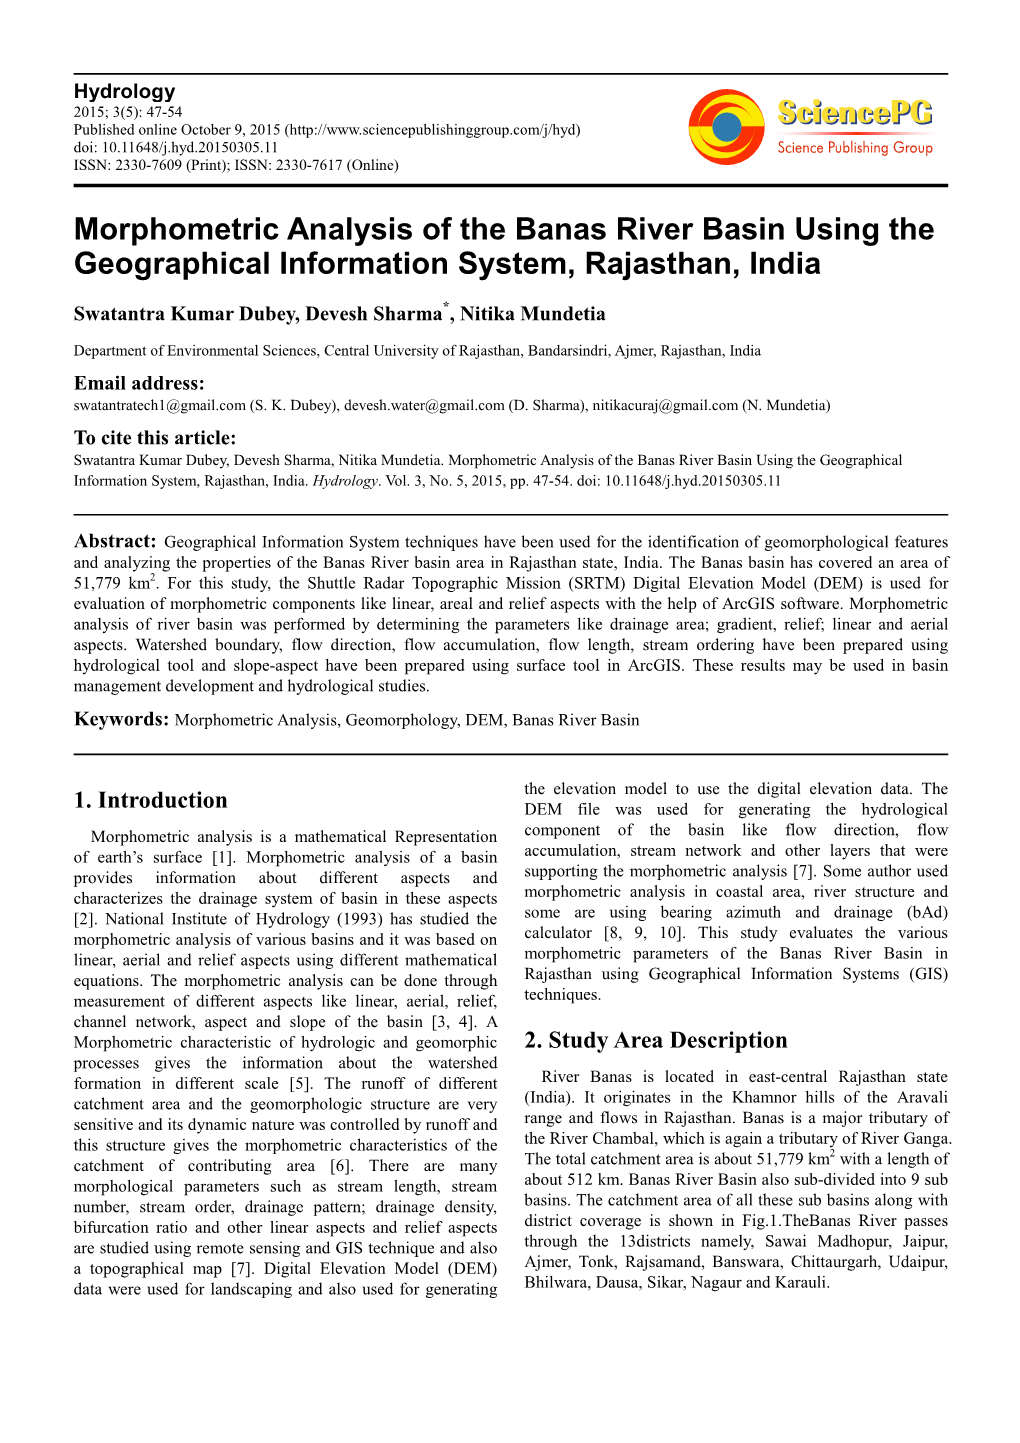 Morphometric Analysis of the Banas River Basin Using the Geographical Information System, Rajasthan, India